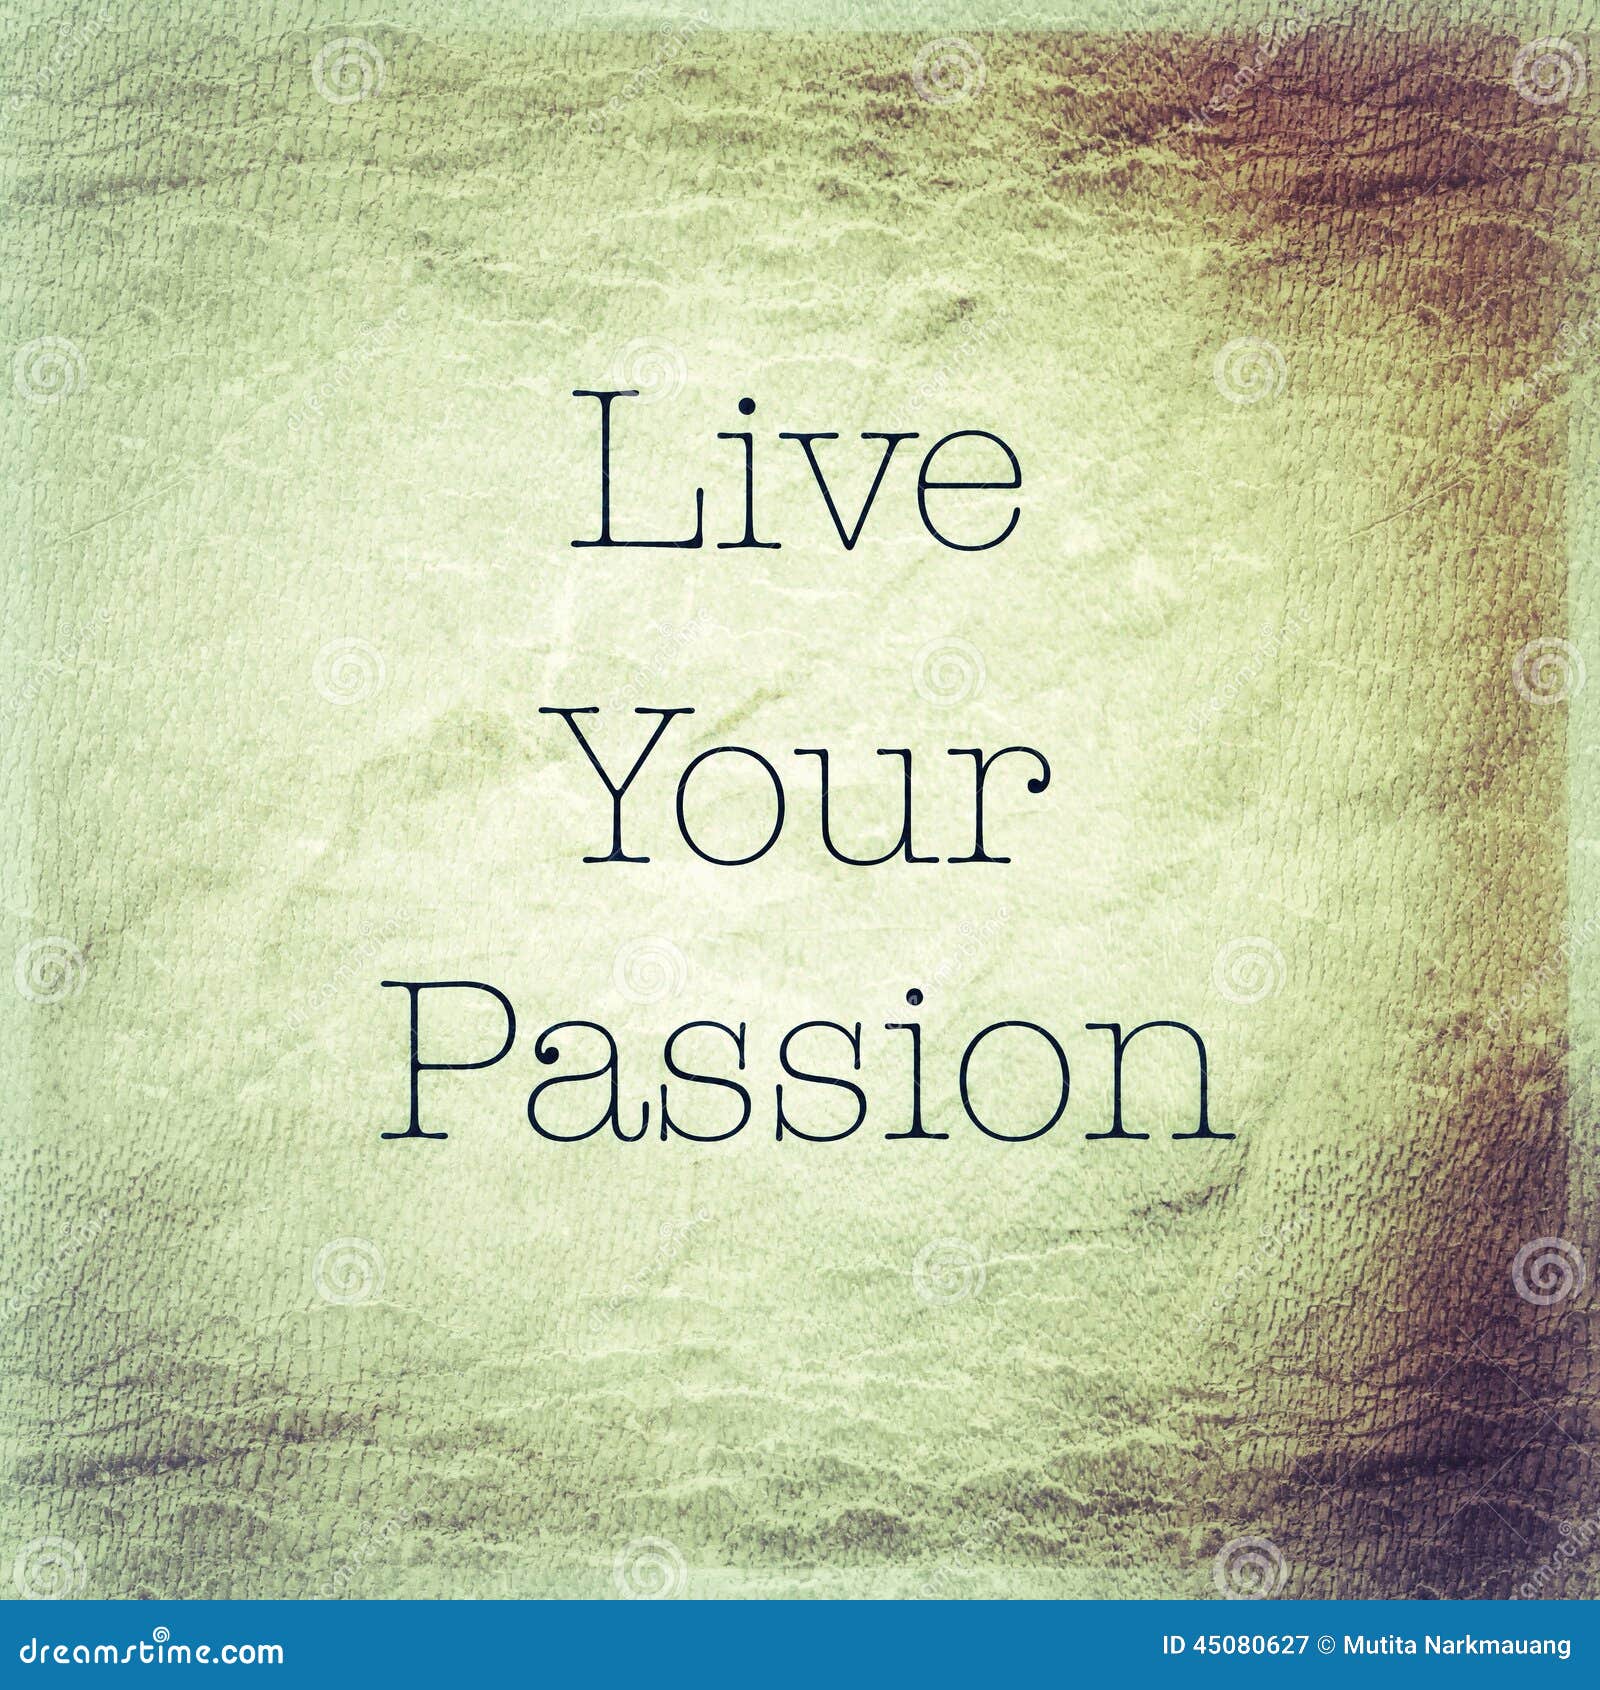 Live Your Passion Inspirational Quotation Stock Illustration 